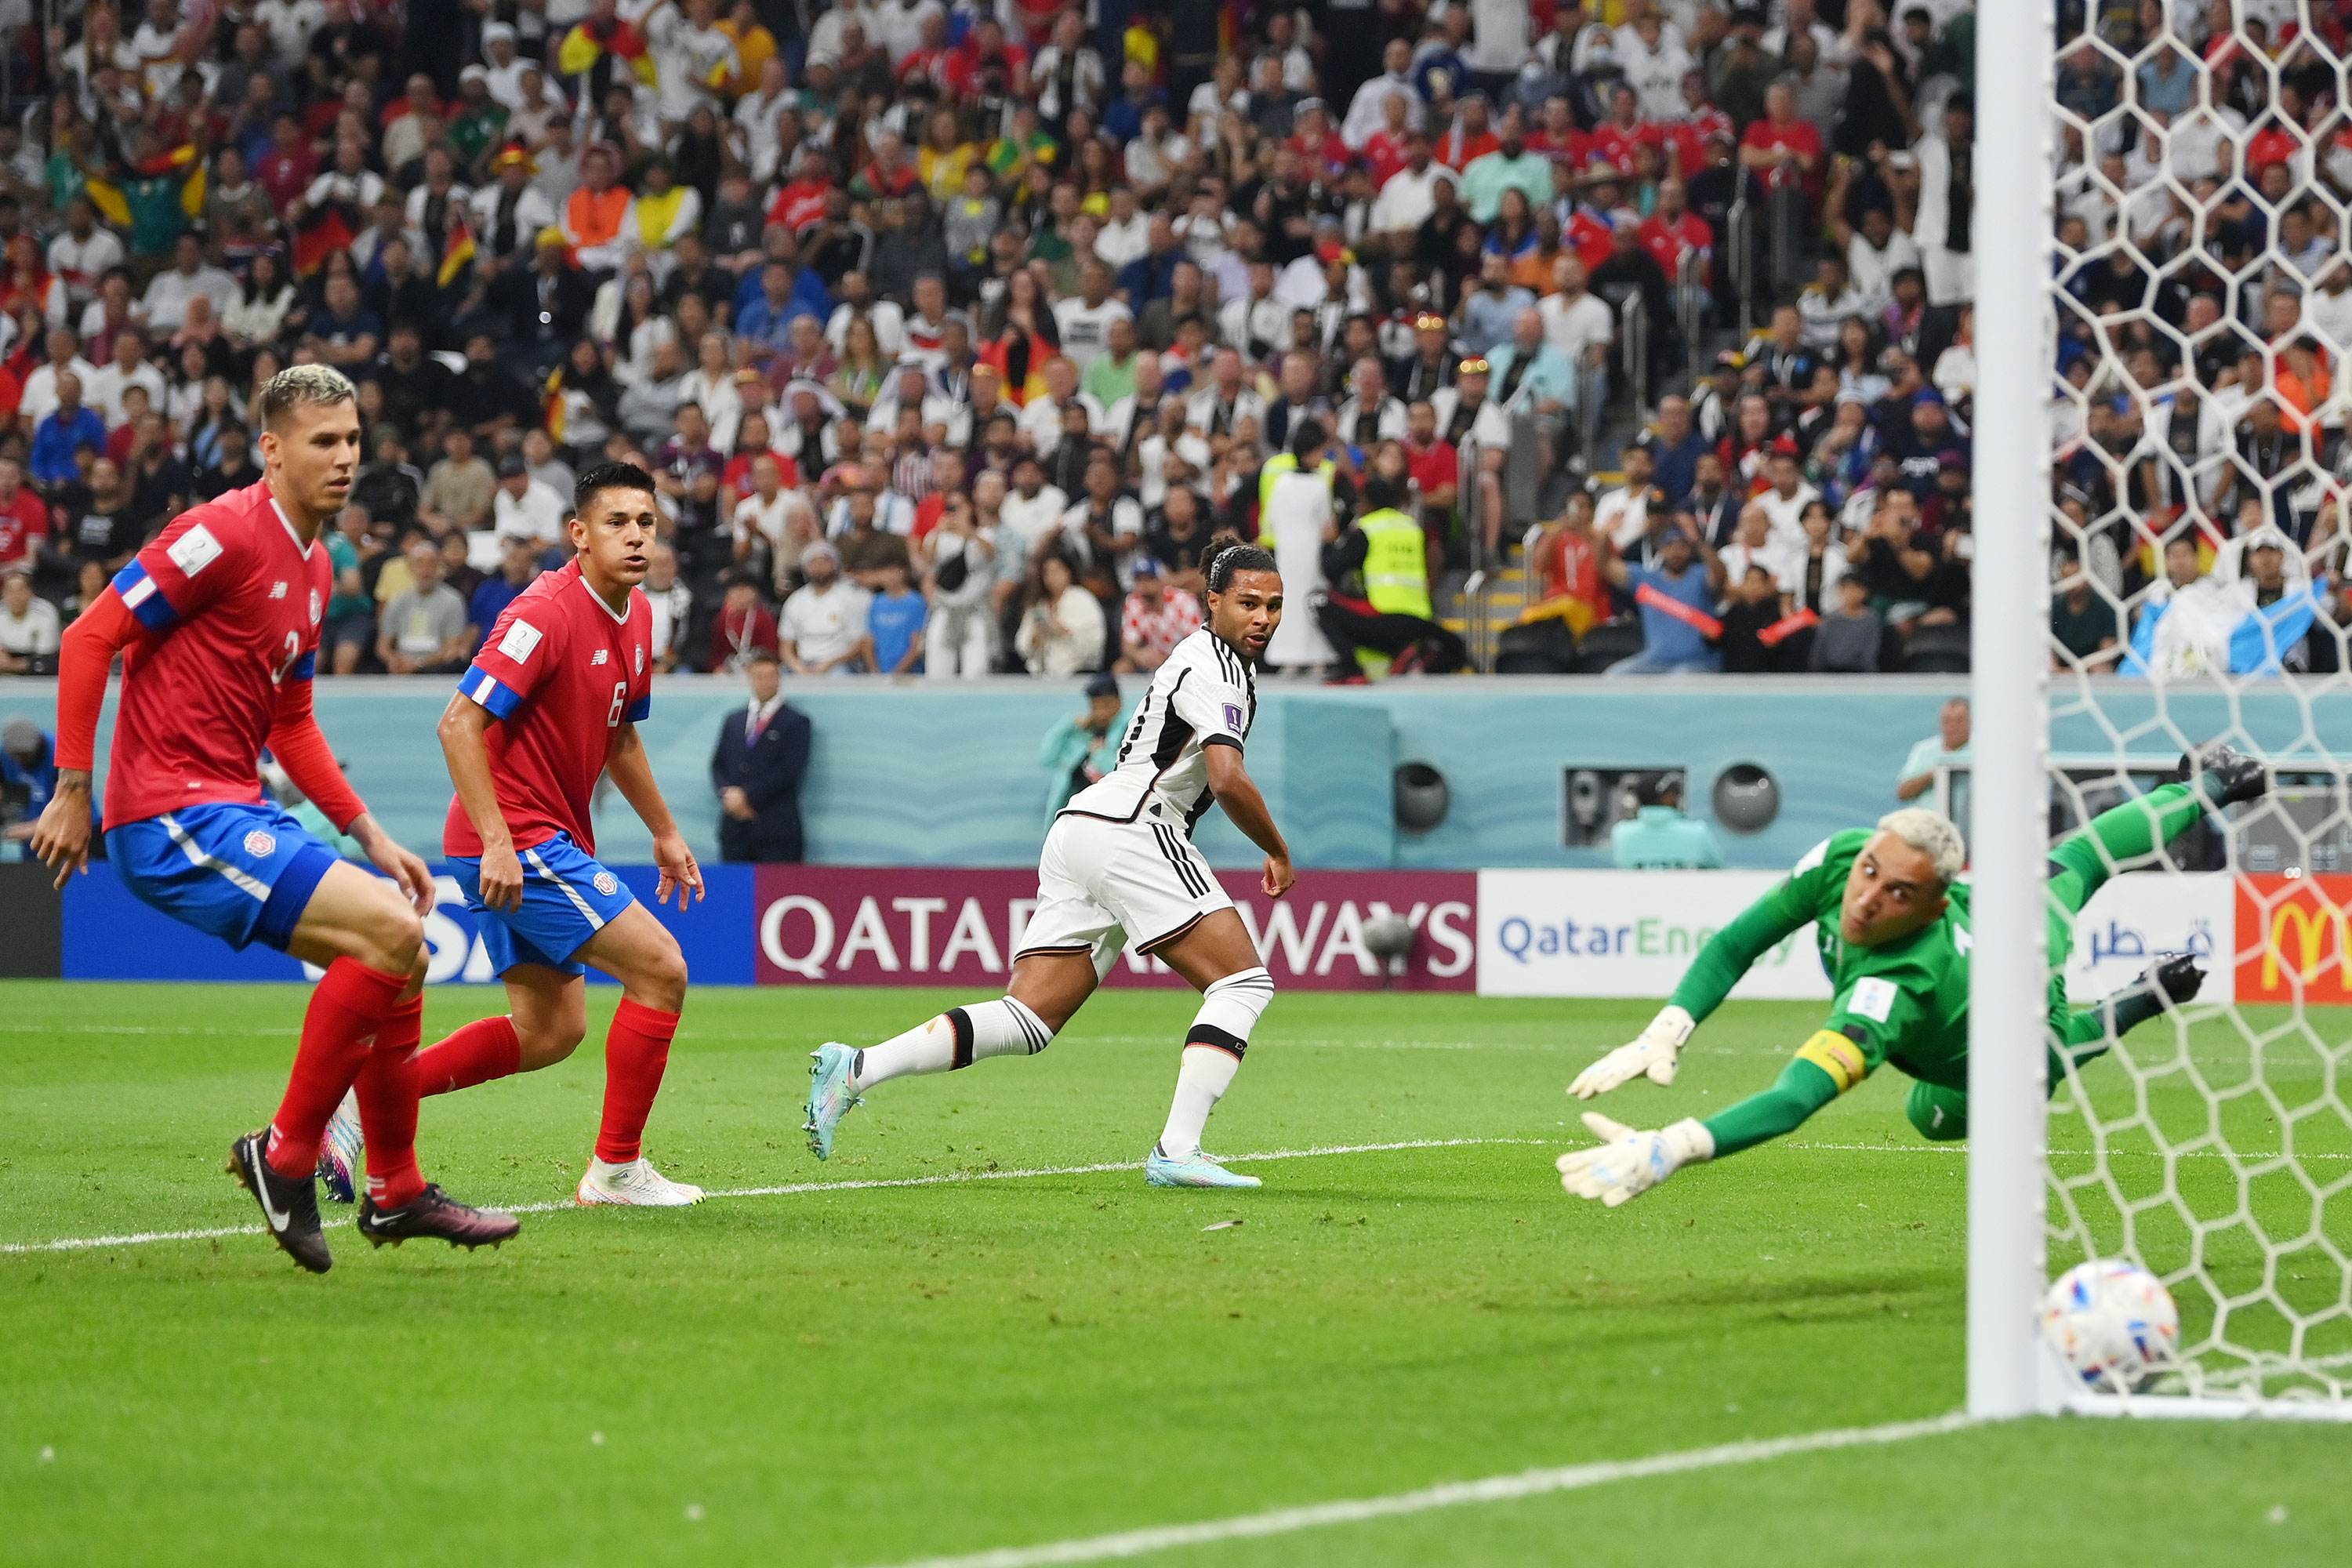 Germany's Serge Gnabry, center, scores his team's first goal against Costa Rica on Thursday.